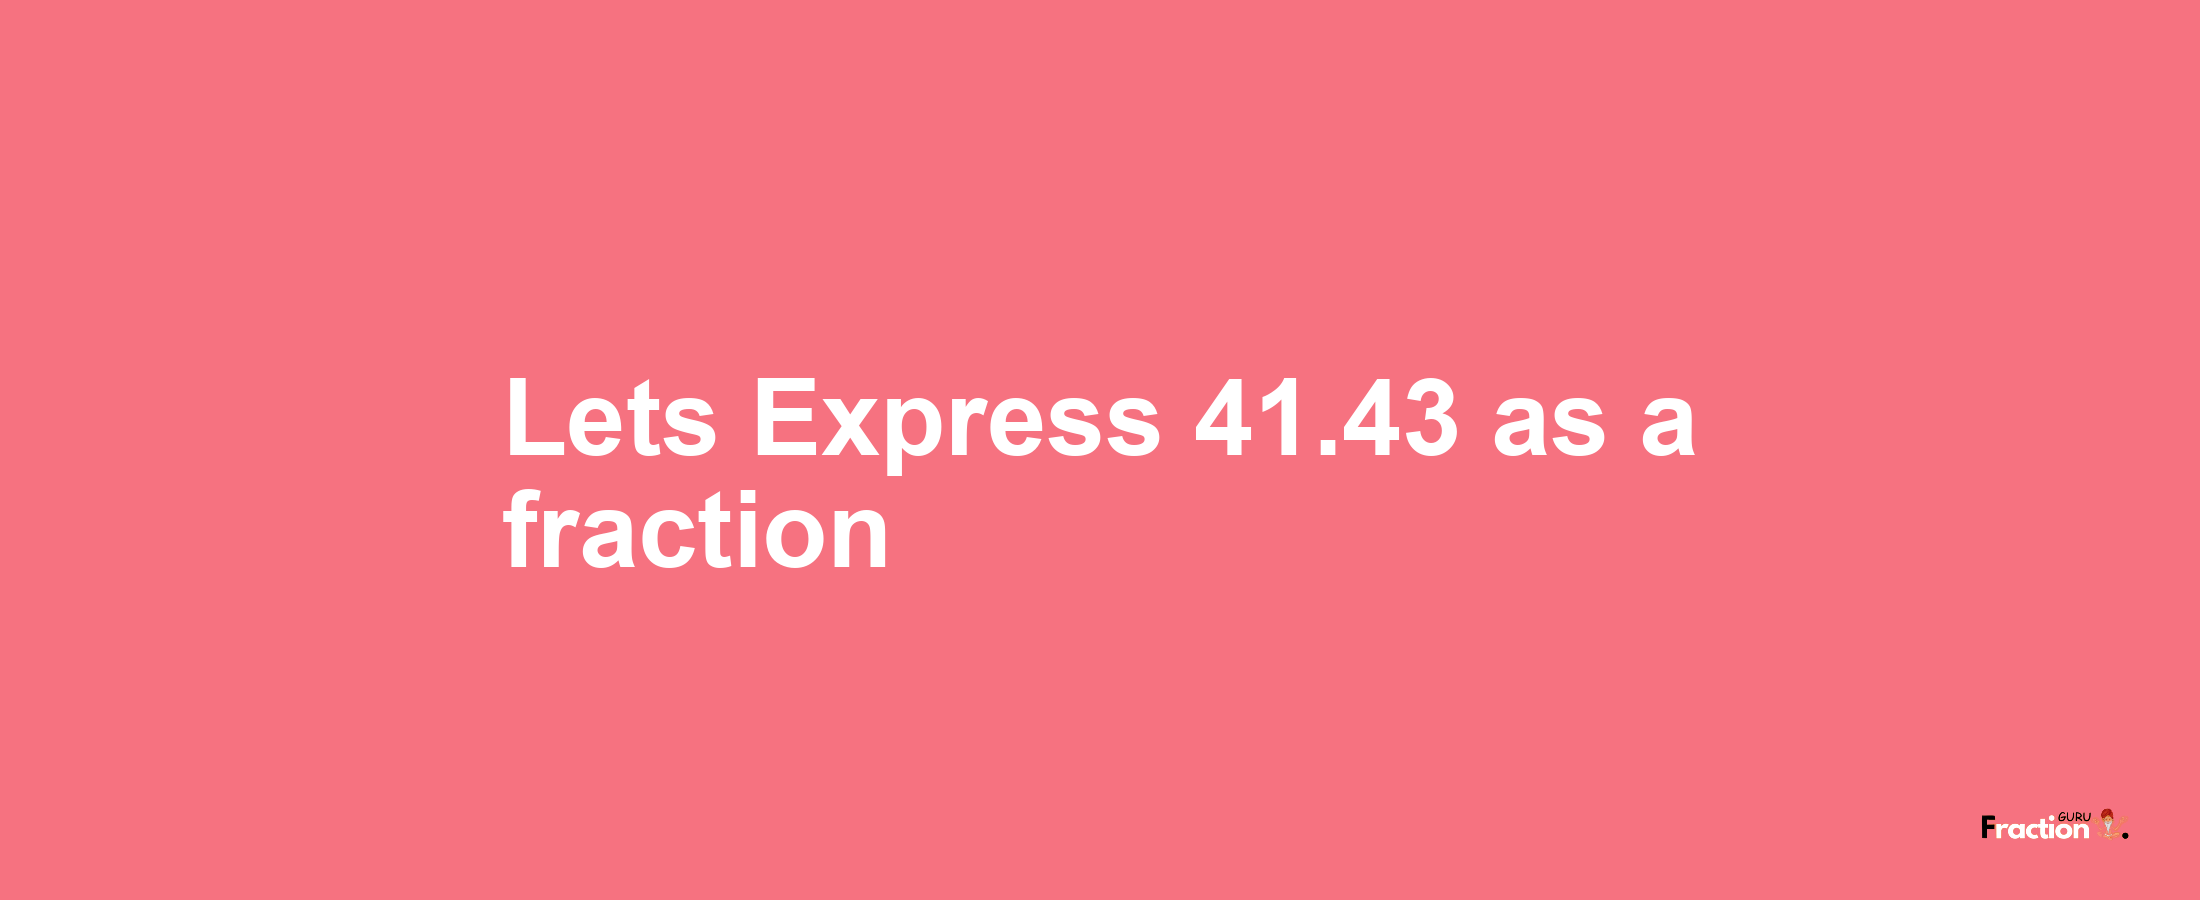 Lets Express 41.43 as afraction